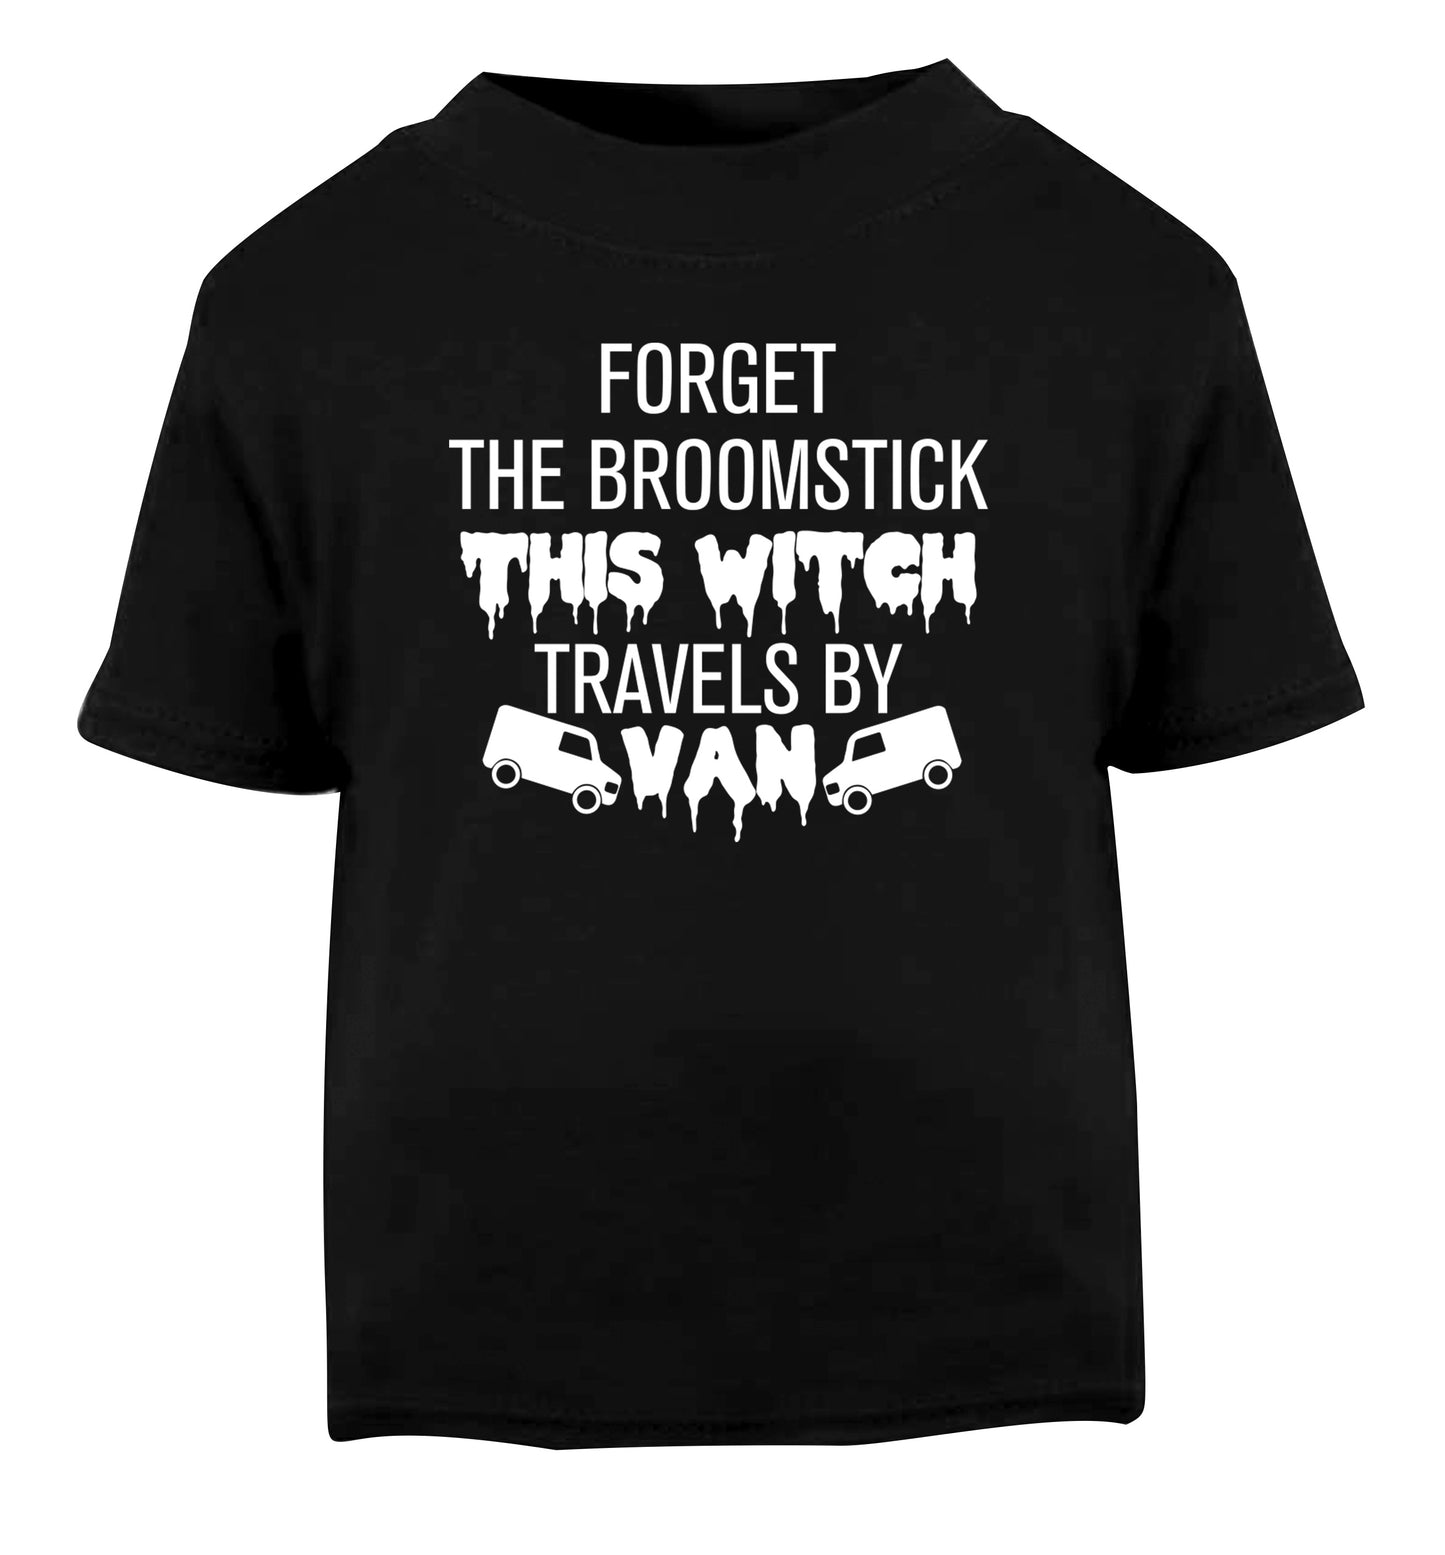 Forget the broomstick this witch travels by van Black Baby Toddler Tshirt 2 years